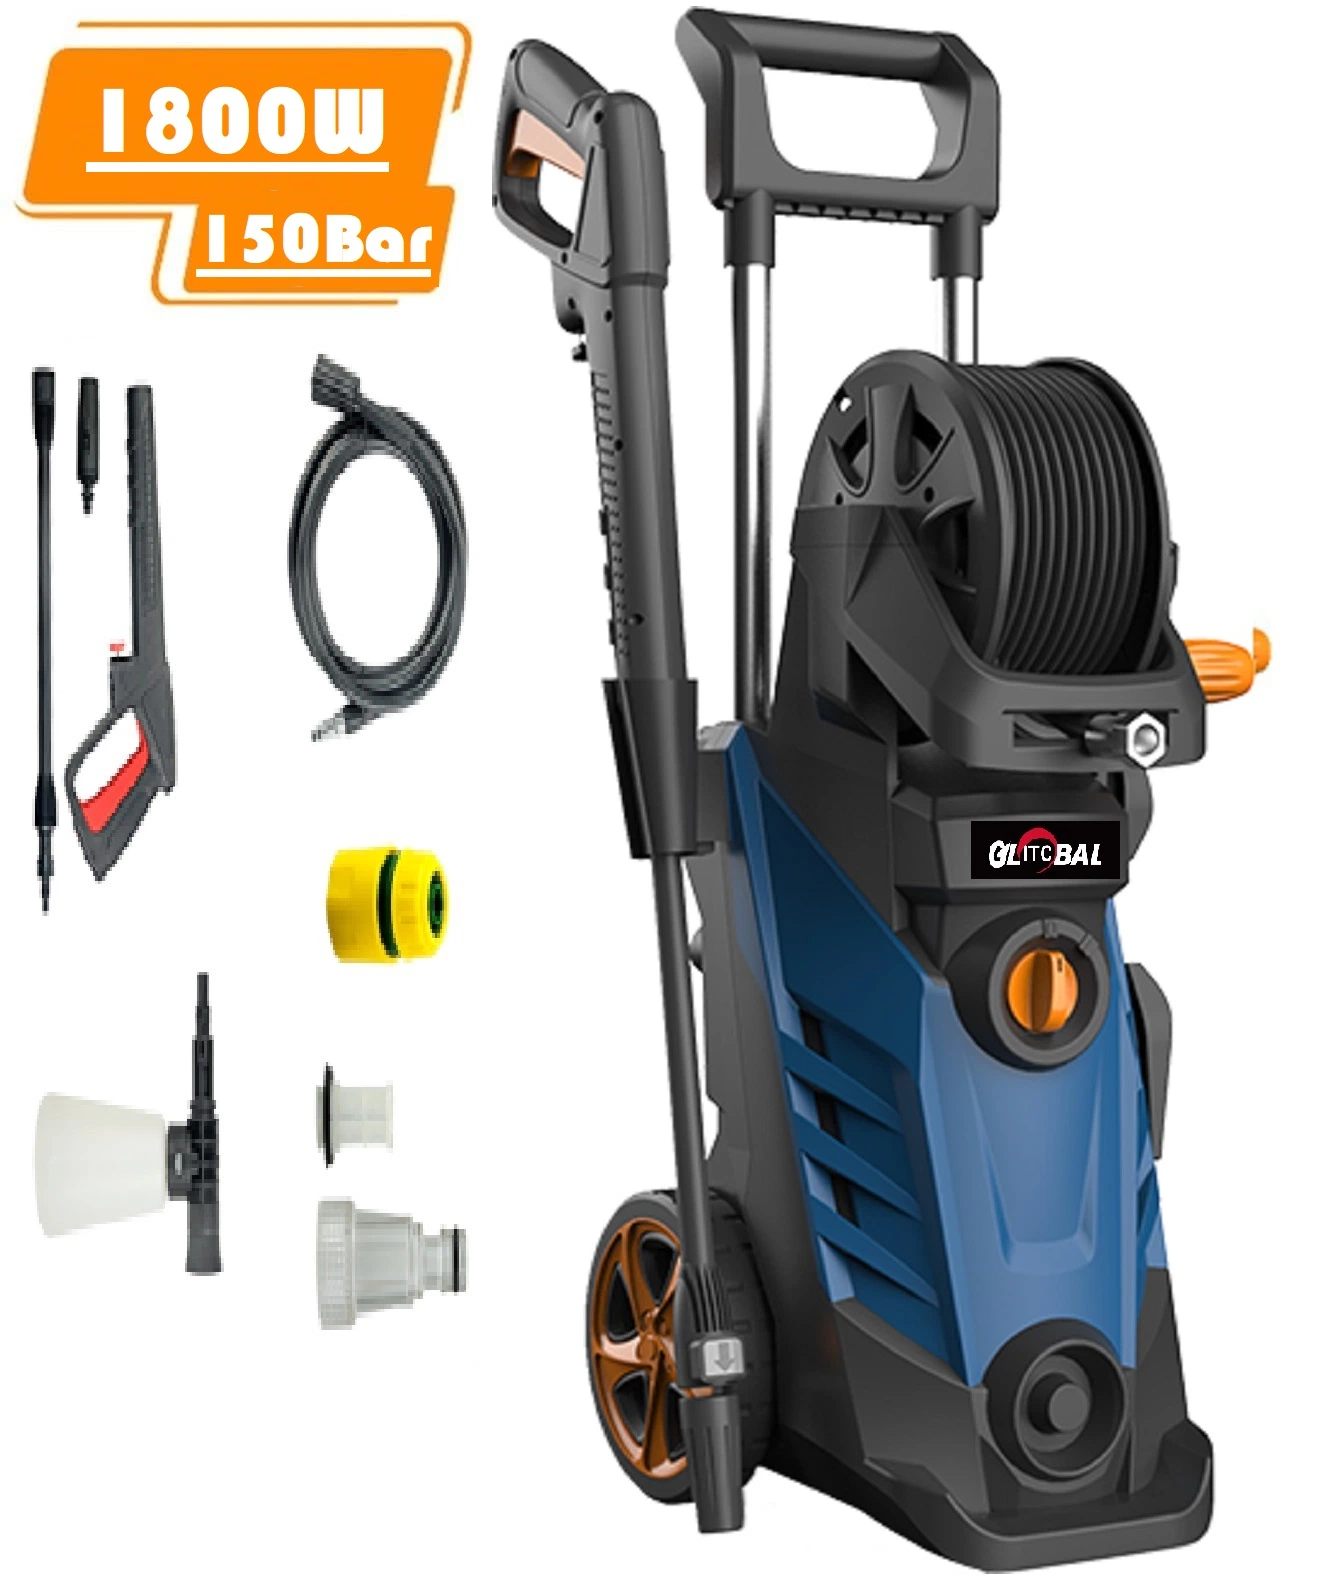 1800W Professional-Electric High Pressure Washer with Hose Roller-Car/Garden/House-Cleaning Machine-Power Tools